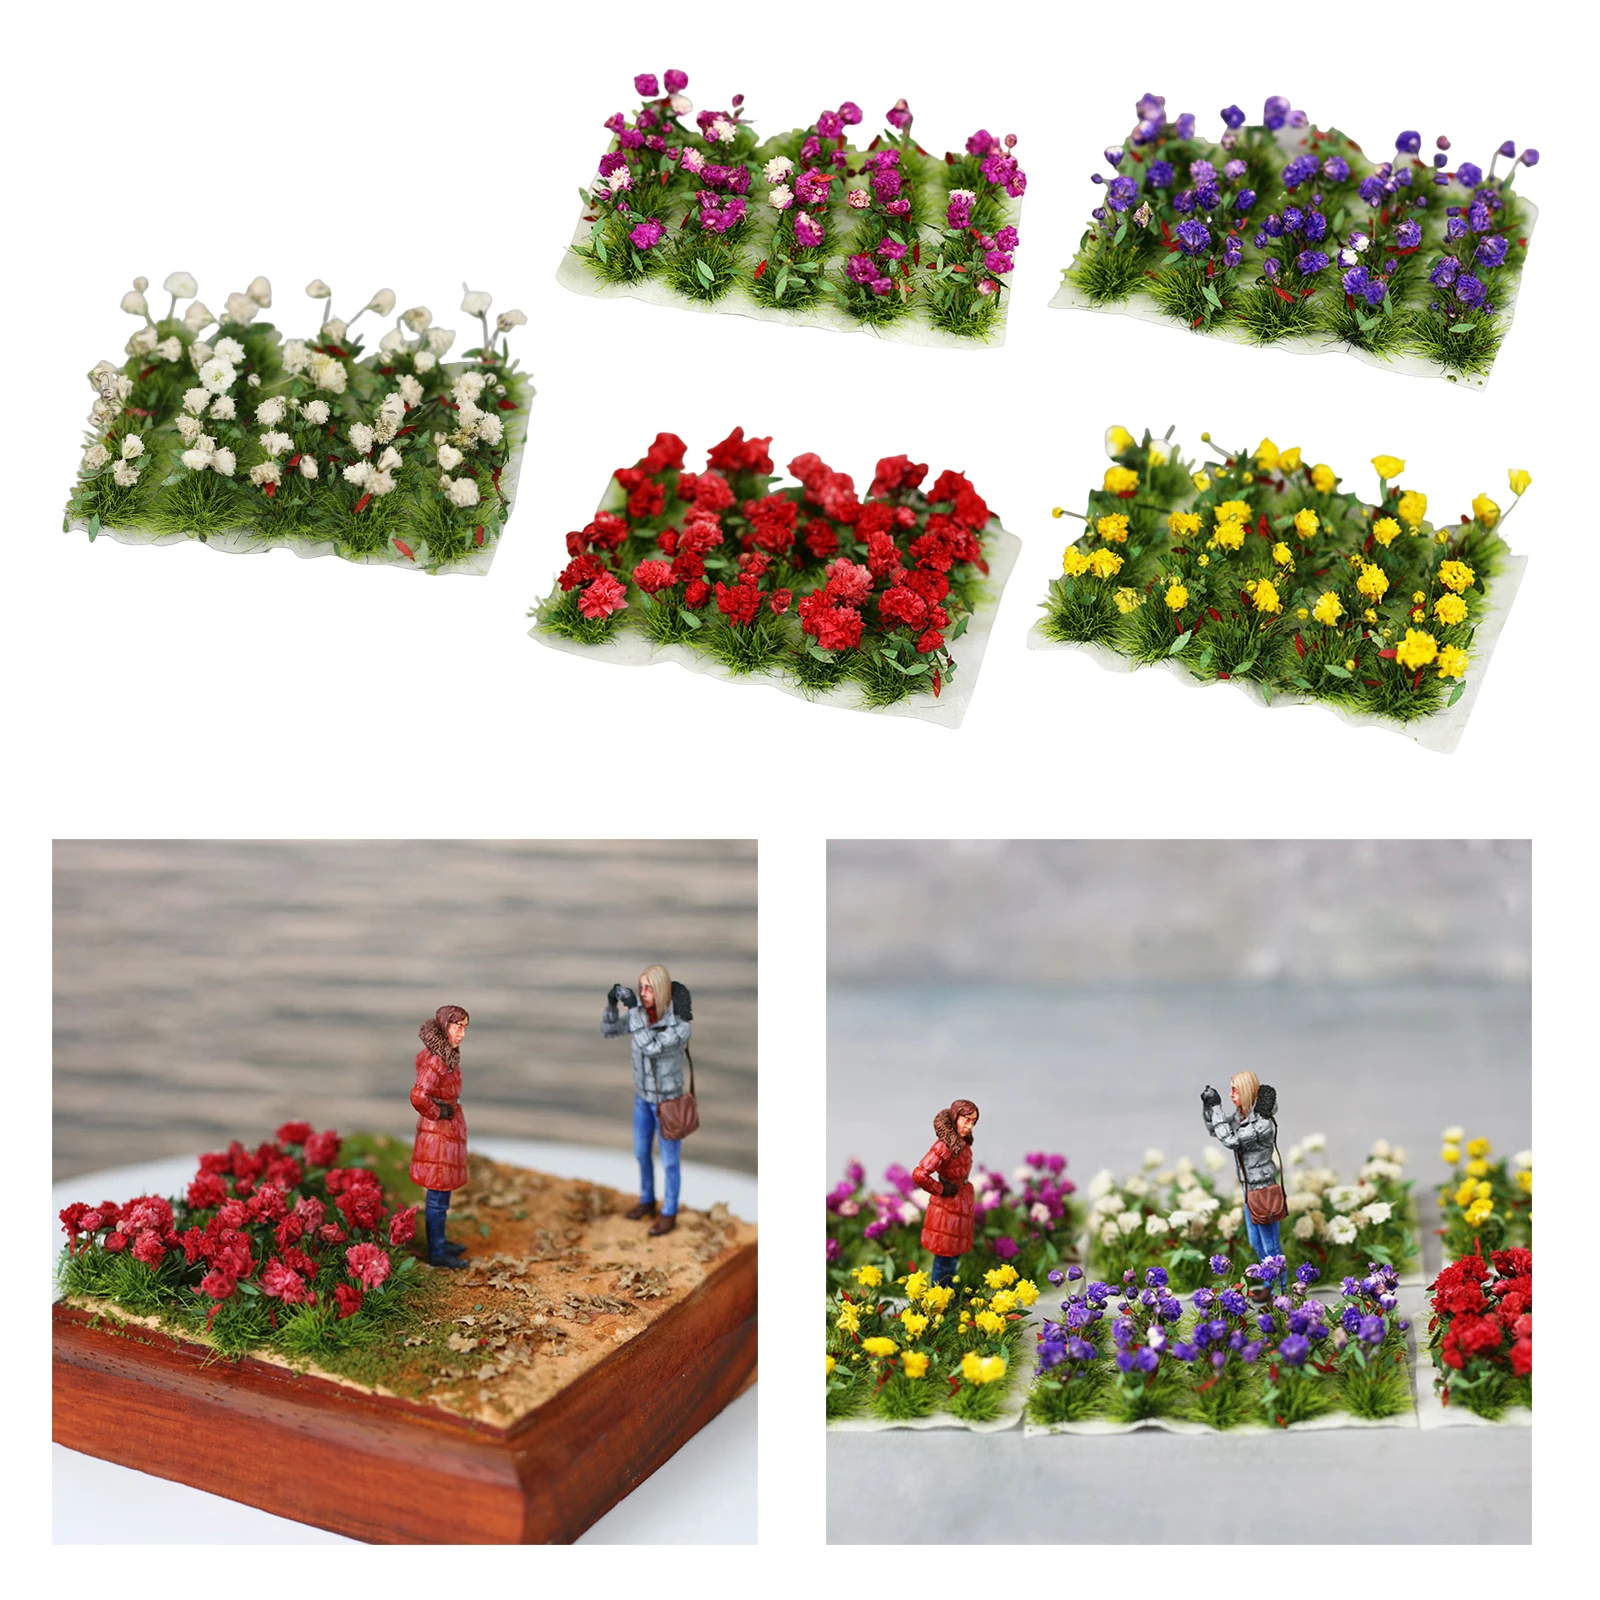 DIY Realistic Flower Cluster Model Railway Architecture Landscape Artificial Grass Building Materials Sand Table Diorama Layout